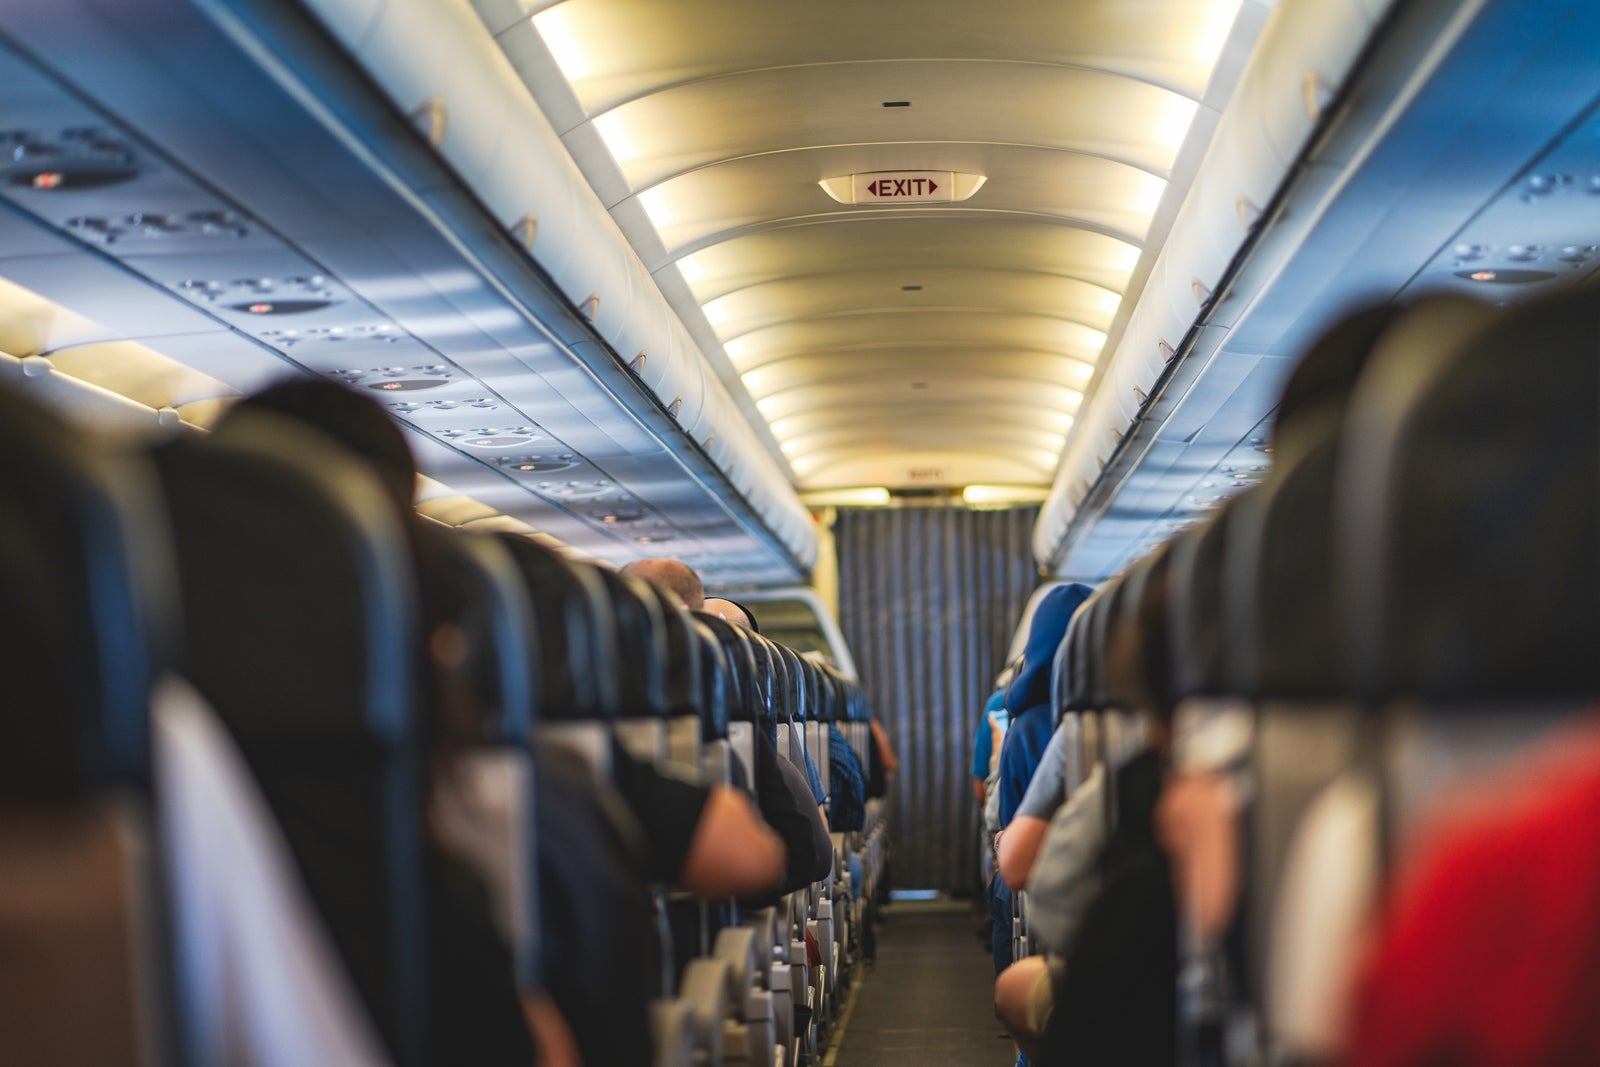 Tips for combating aches and pains on long flights - The Points Guy